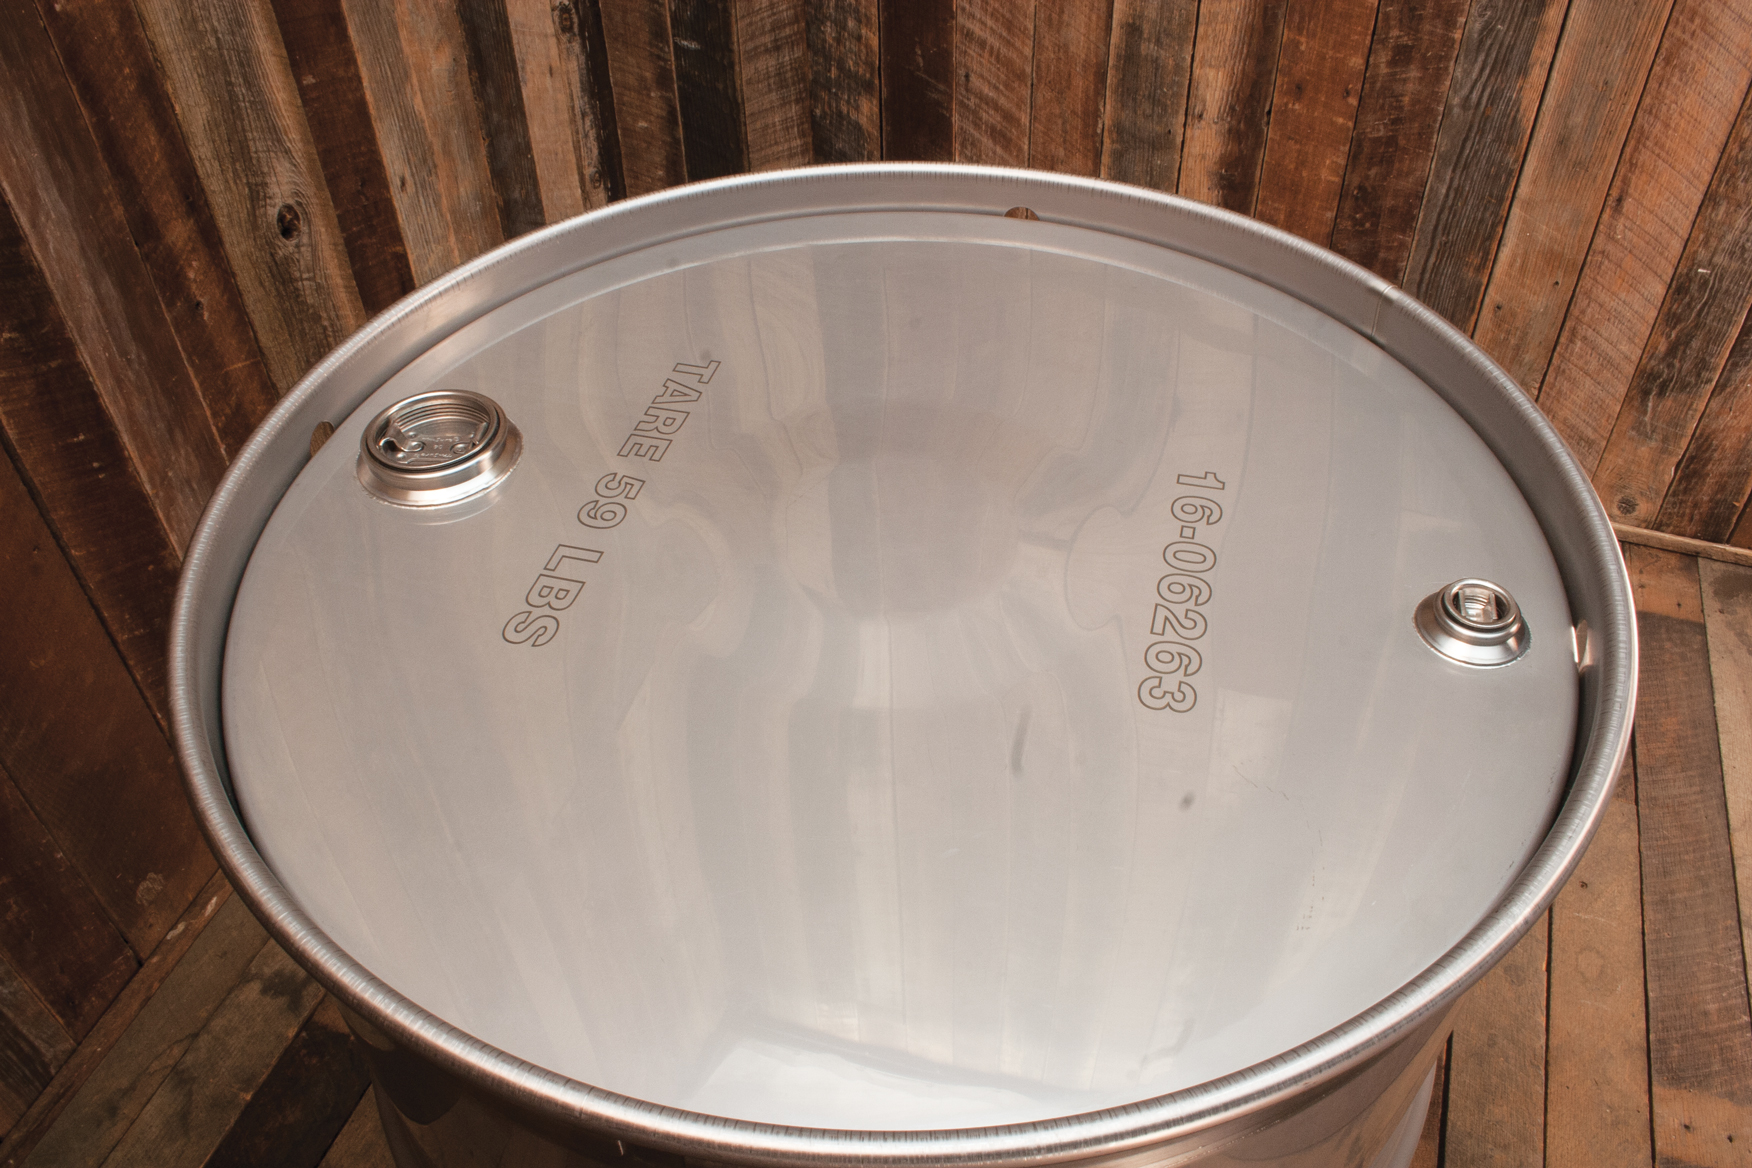 New 55 Gallon Seamless Stainless-Steel Drum – 316ss, Open Top & Food Grade